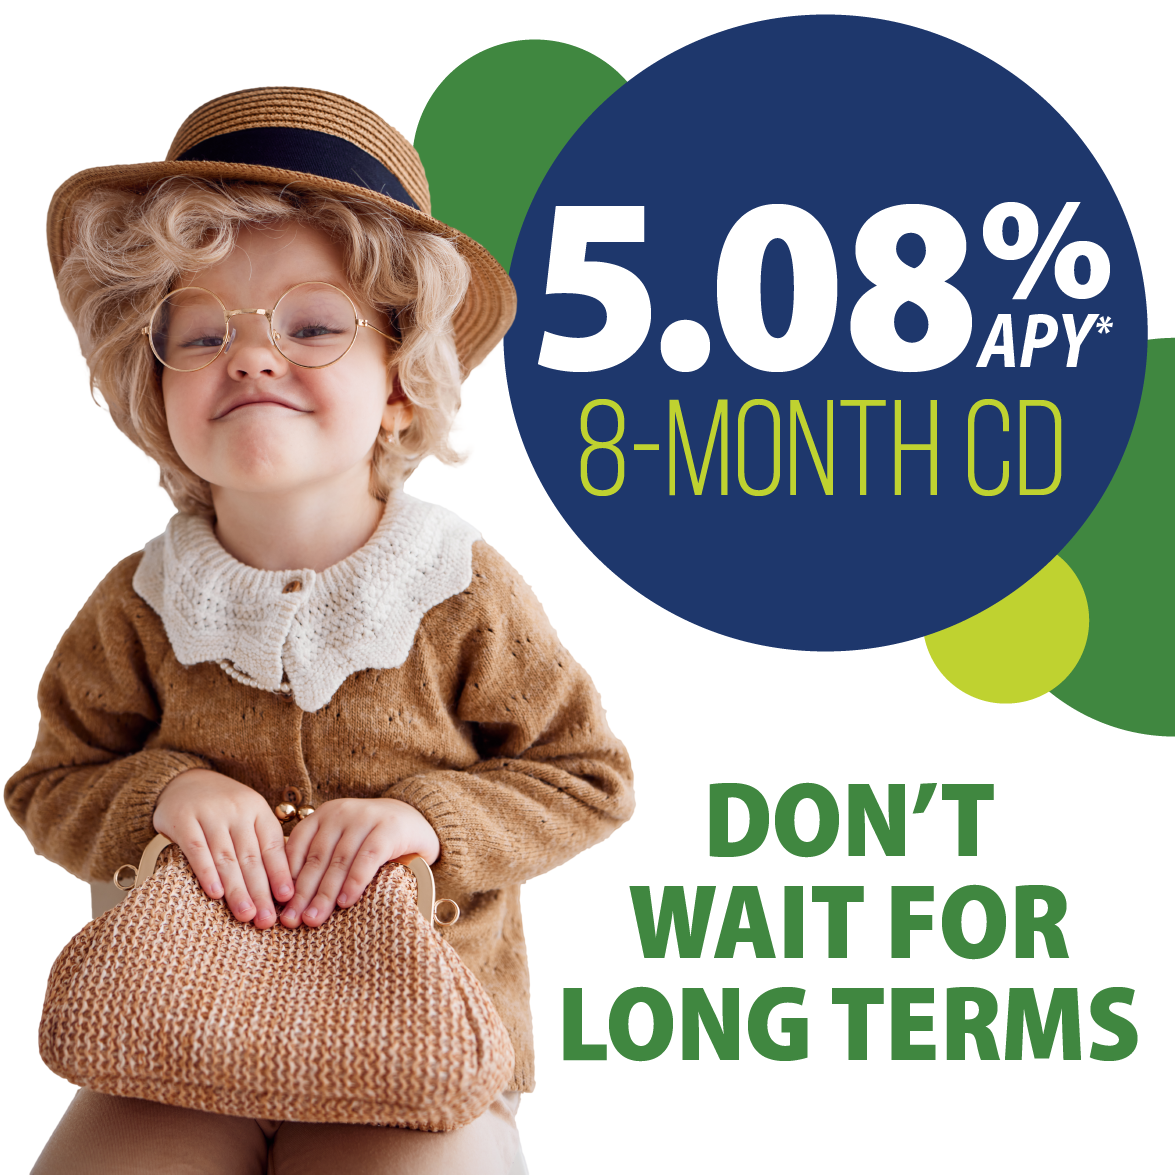 Female toddler dressed like old lady. Caption reads "don't wait for long terms"